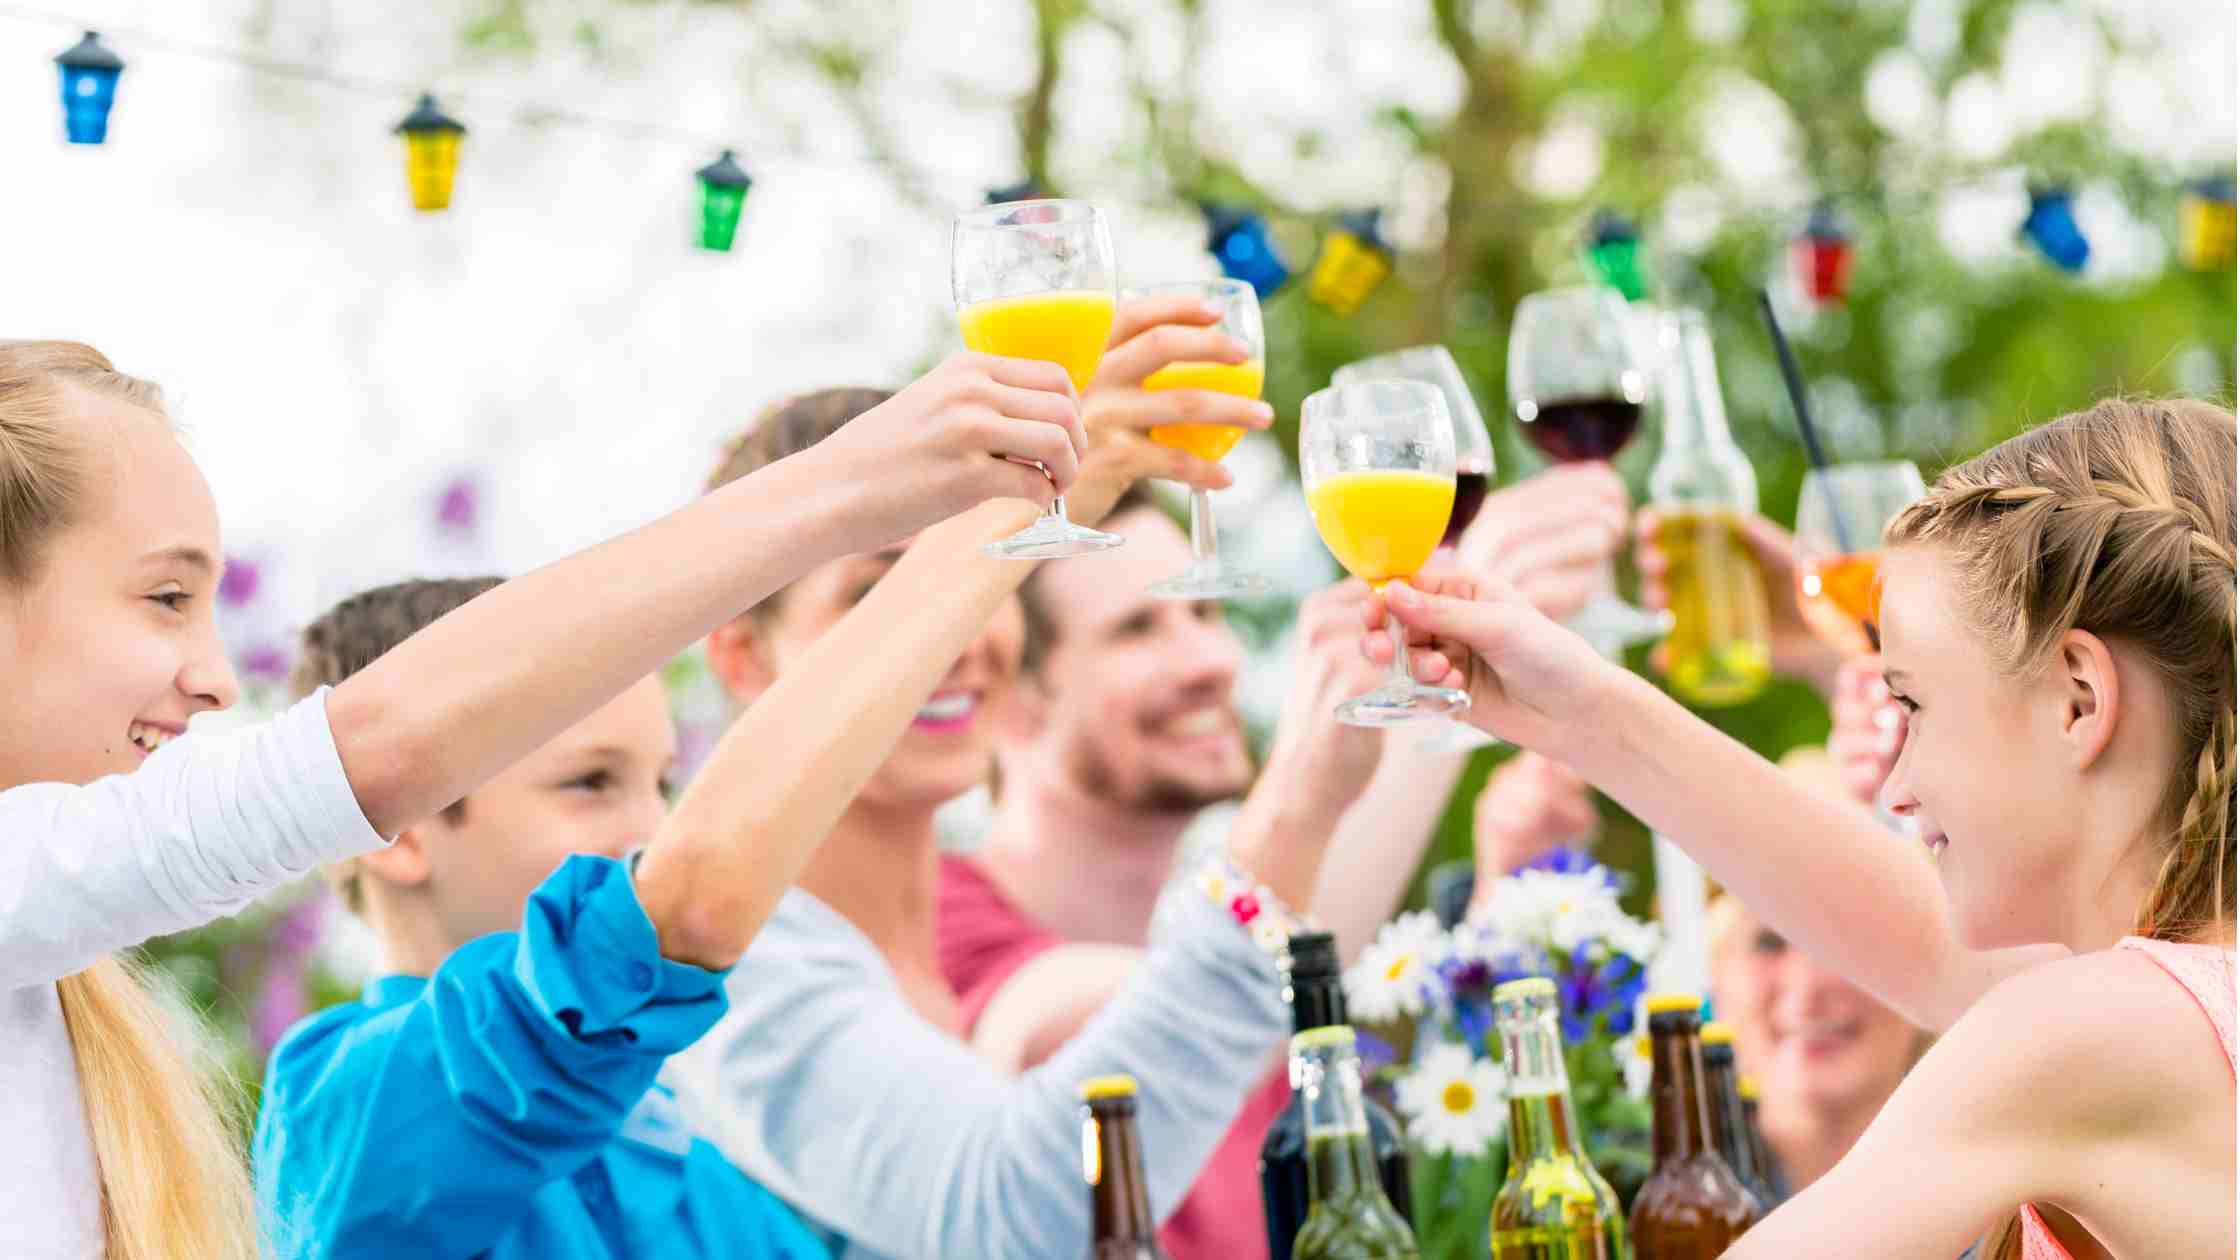 7 Effective Ways to prevent noise pollution in party at neighborhood